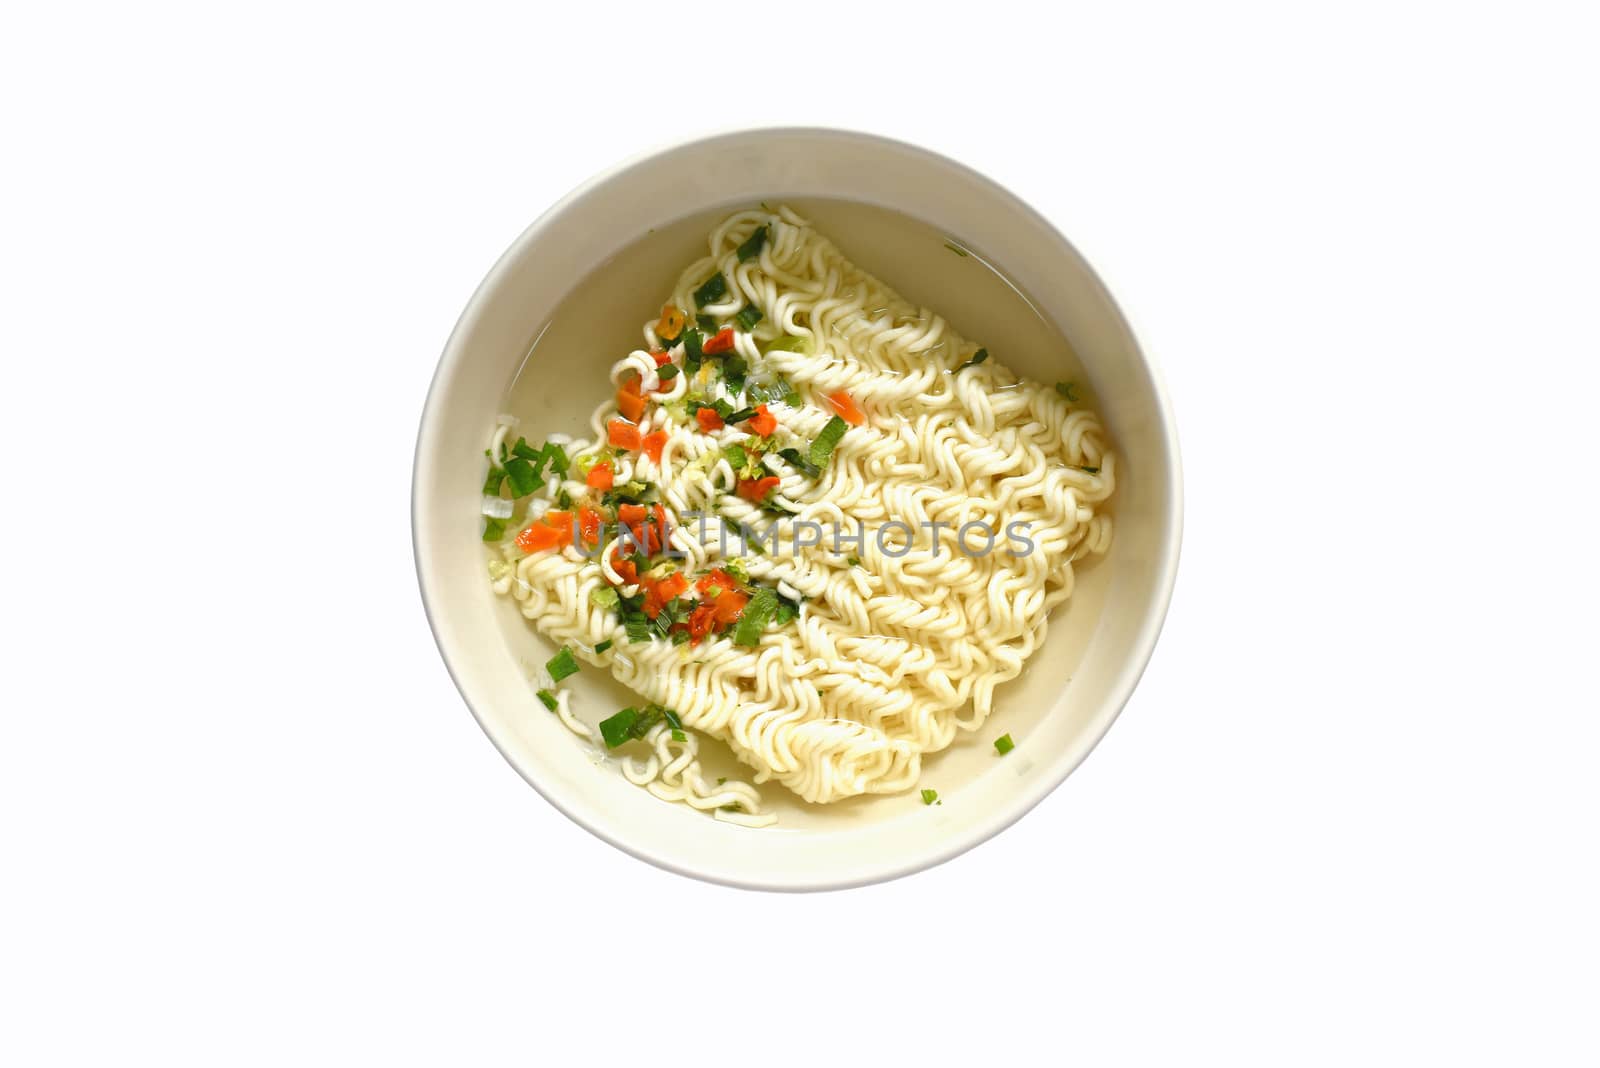 round instant noodle (Thai mama noodles instant food) in hot water in bowl cooked the ingredients Isolated on white background. Top view